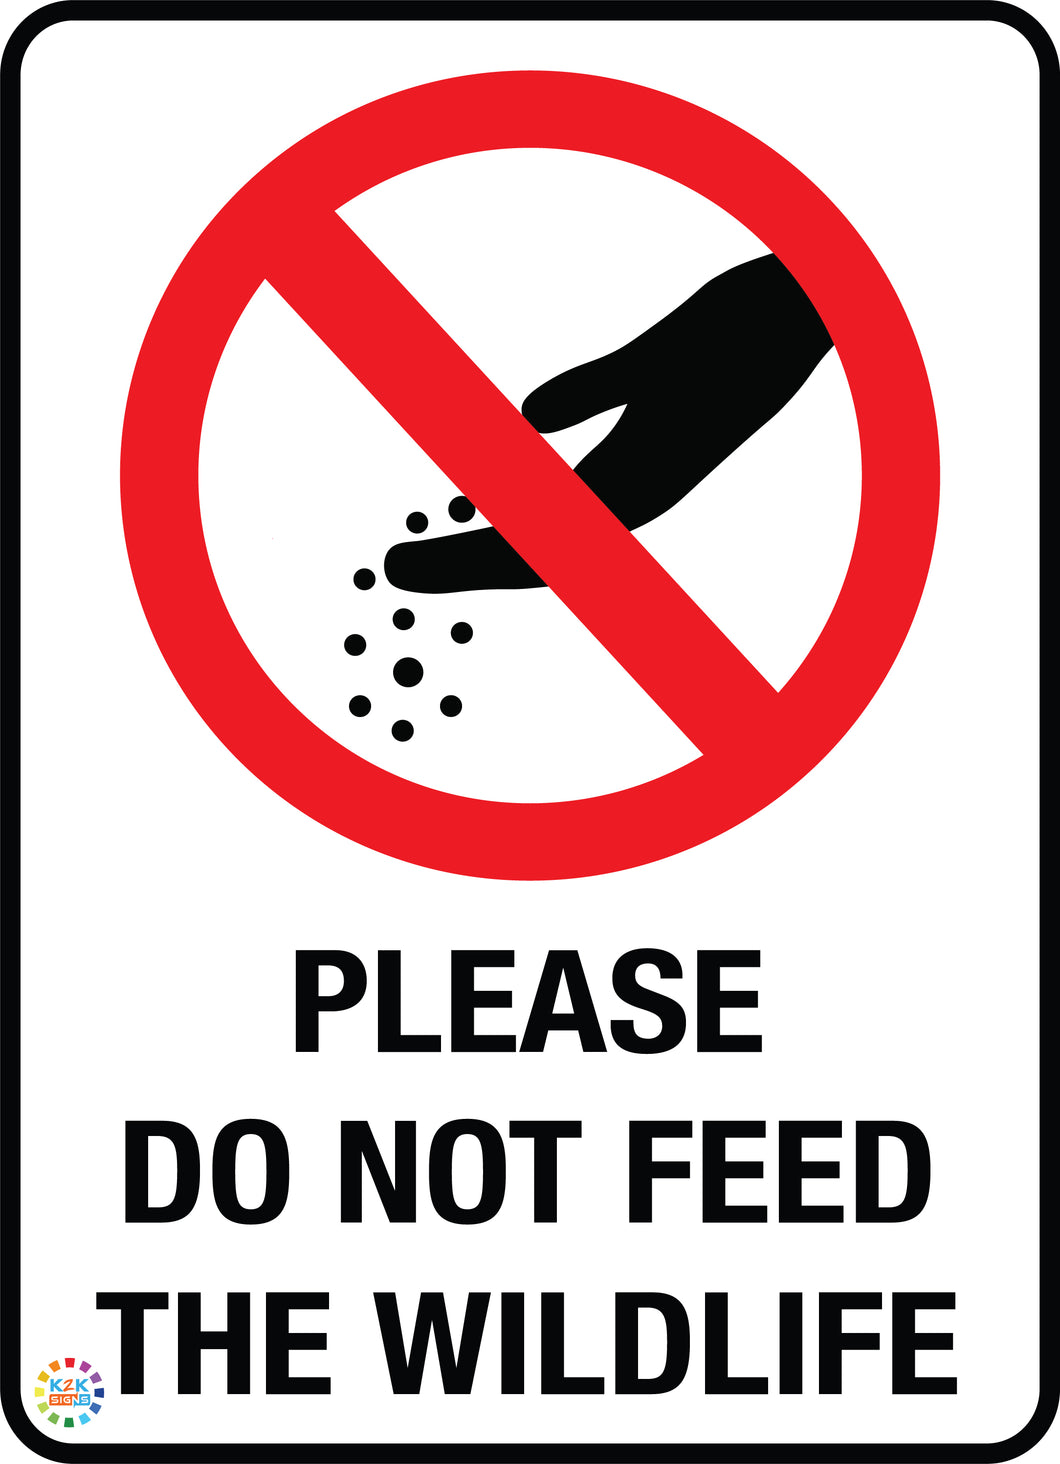 Please Do Not Feed The Wildlife